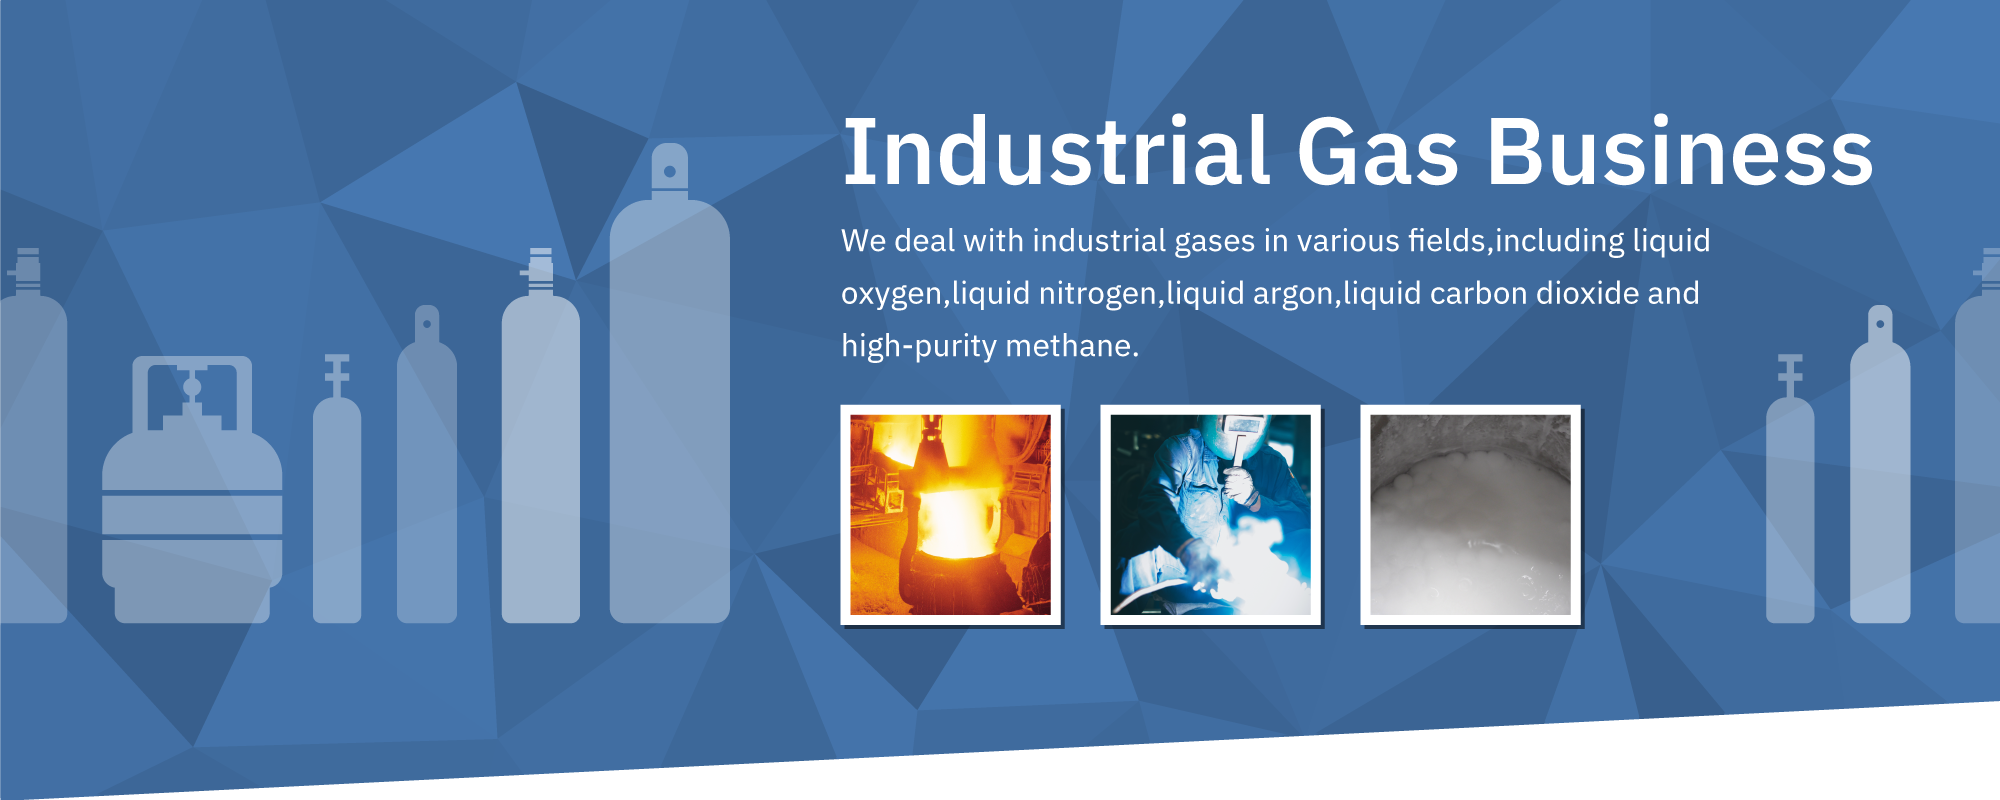 Industrial Gas Business: We deal with industrial gases in various fields,including liquid oxygen,liquid nitrogen,liquid argon,liquid carbon dioxide and high-purity methane.